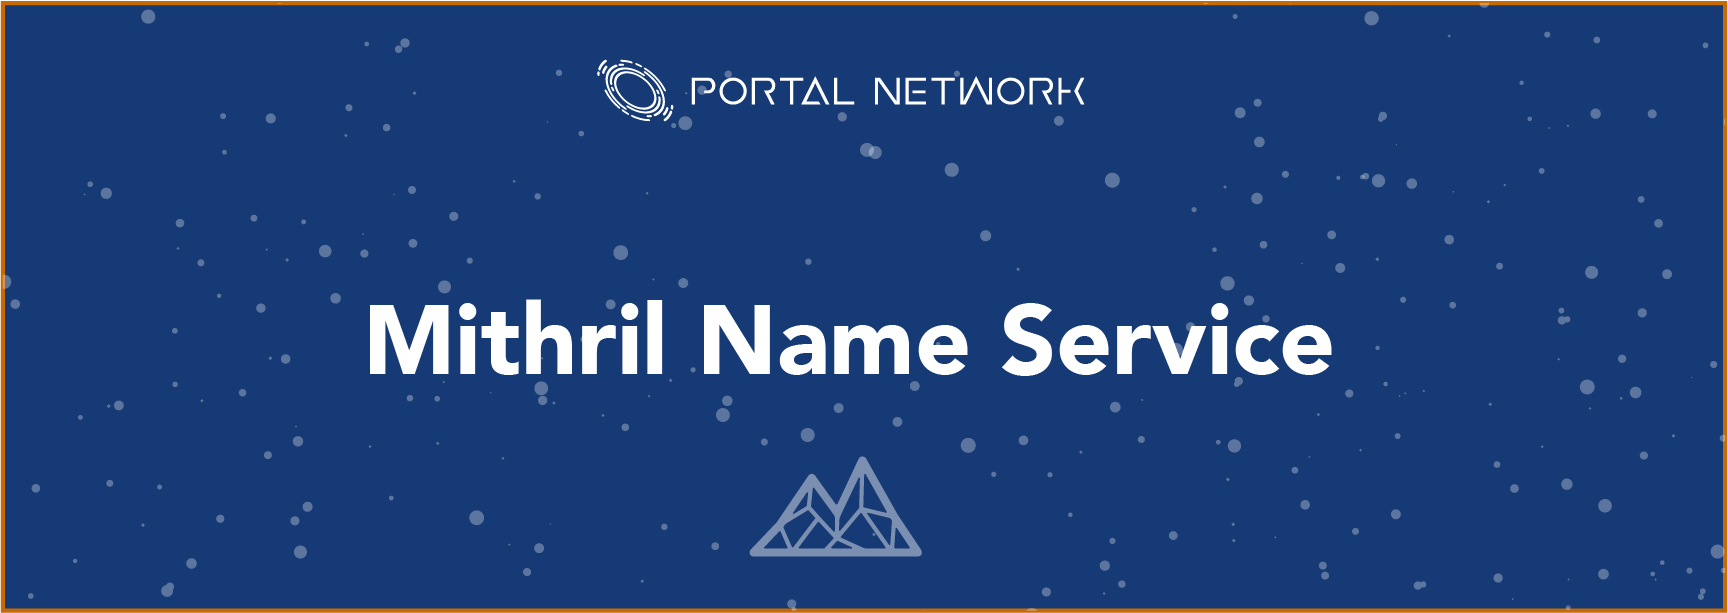 Mithril Name Service